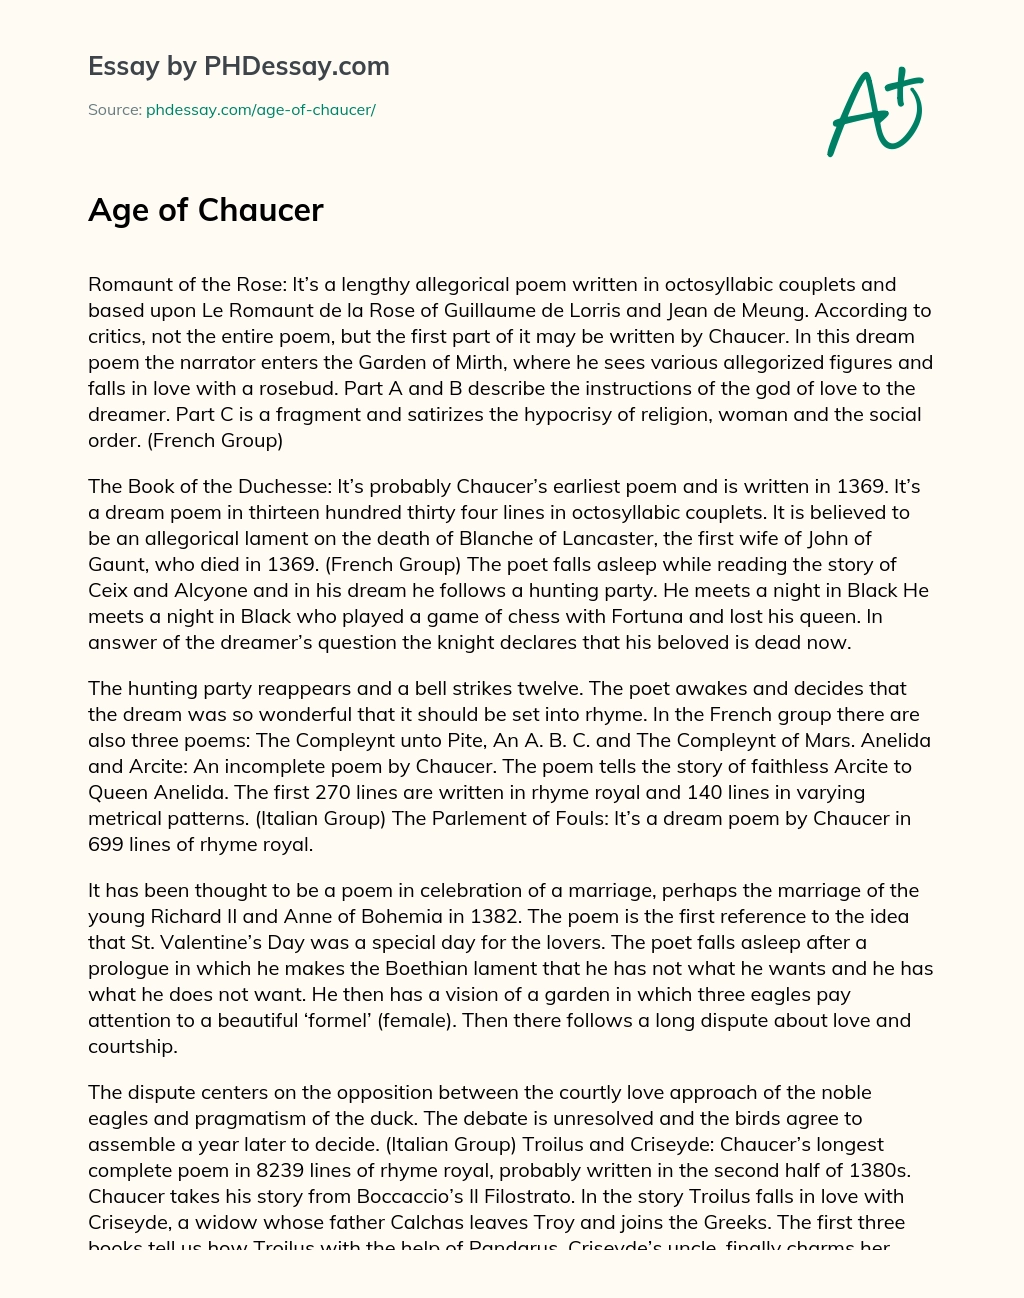 Age of Chaucer essay